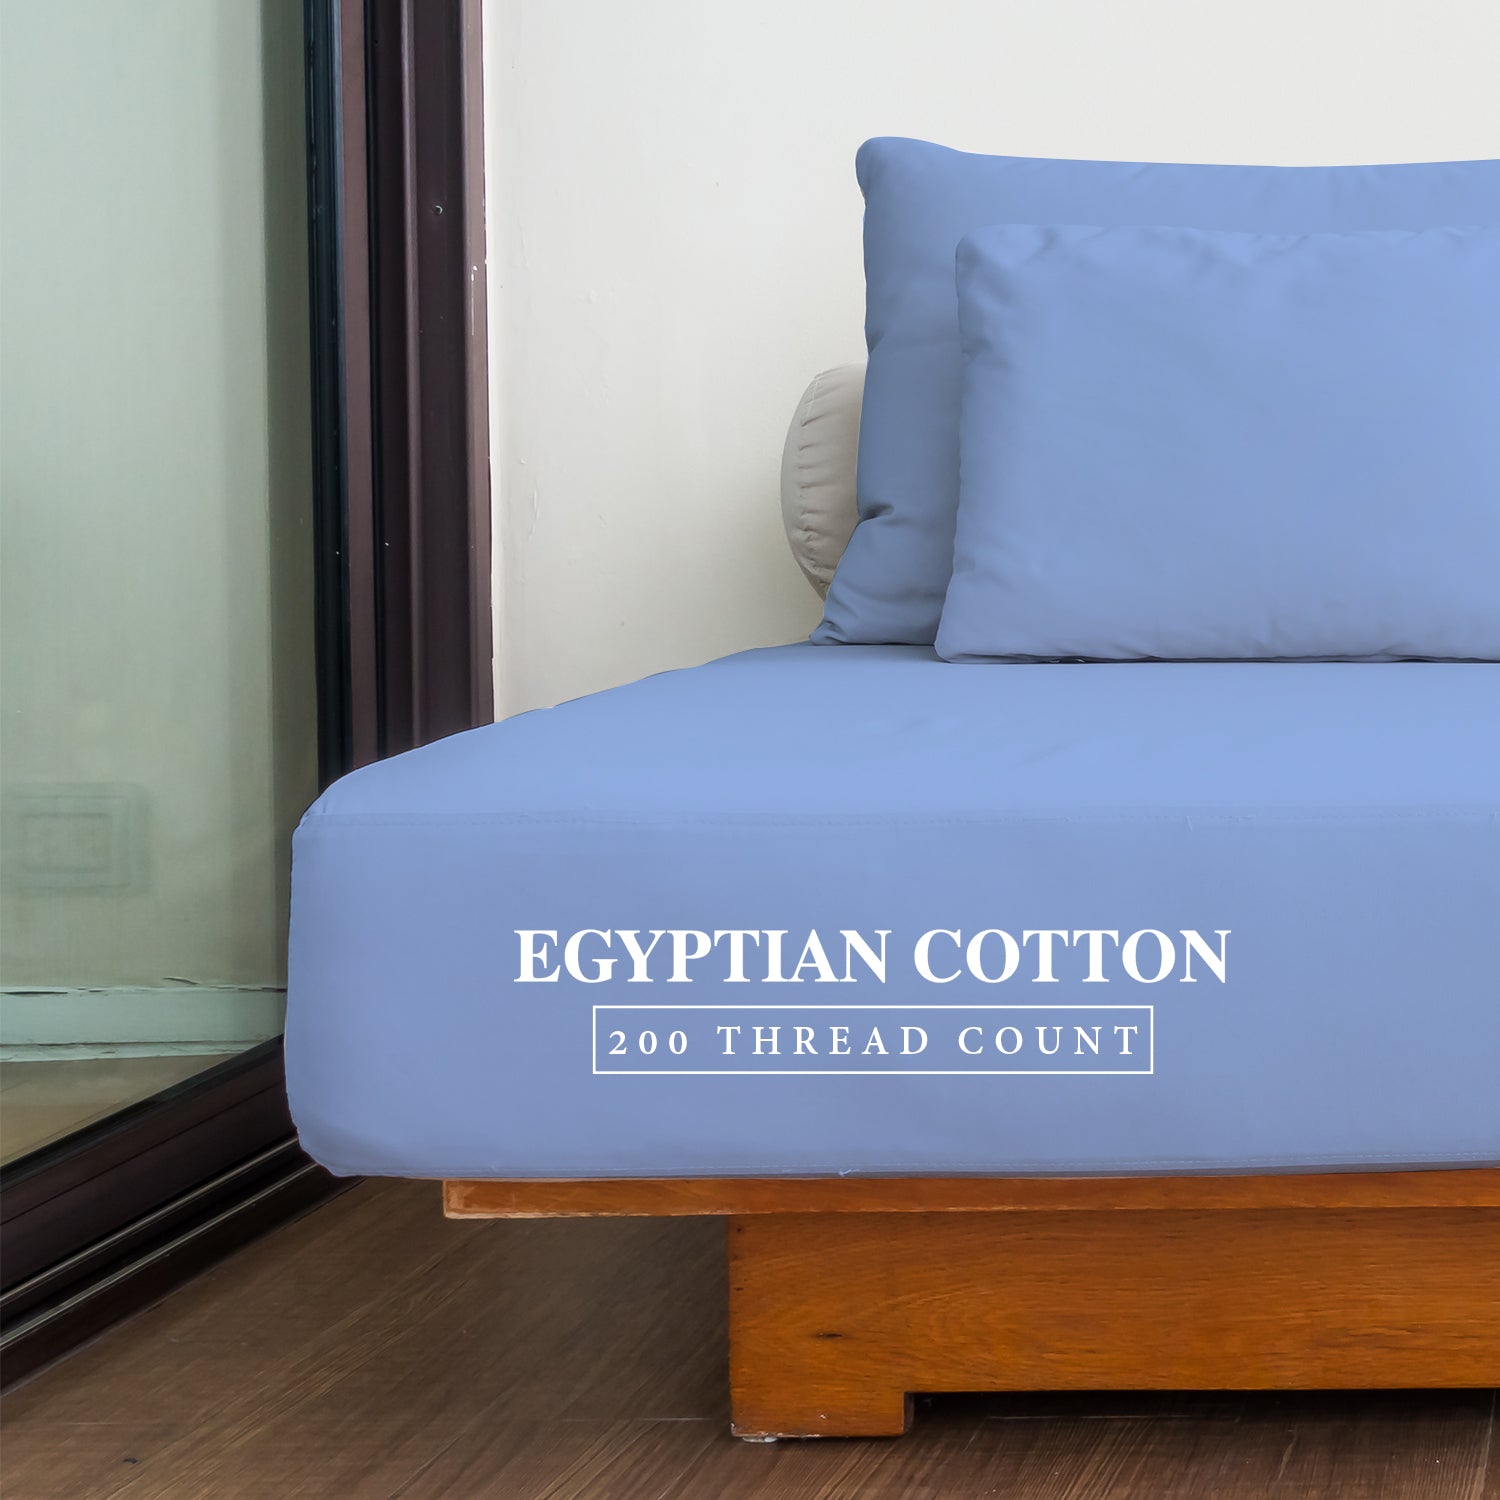 MistyMorning what is Single small Double King Super King extra deep cotton Fitted Sheet 40cm sizes pattern percale